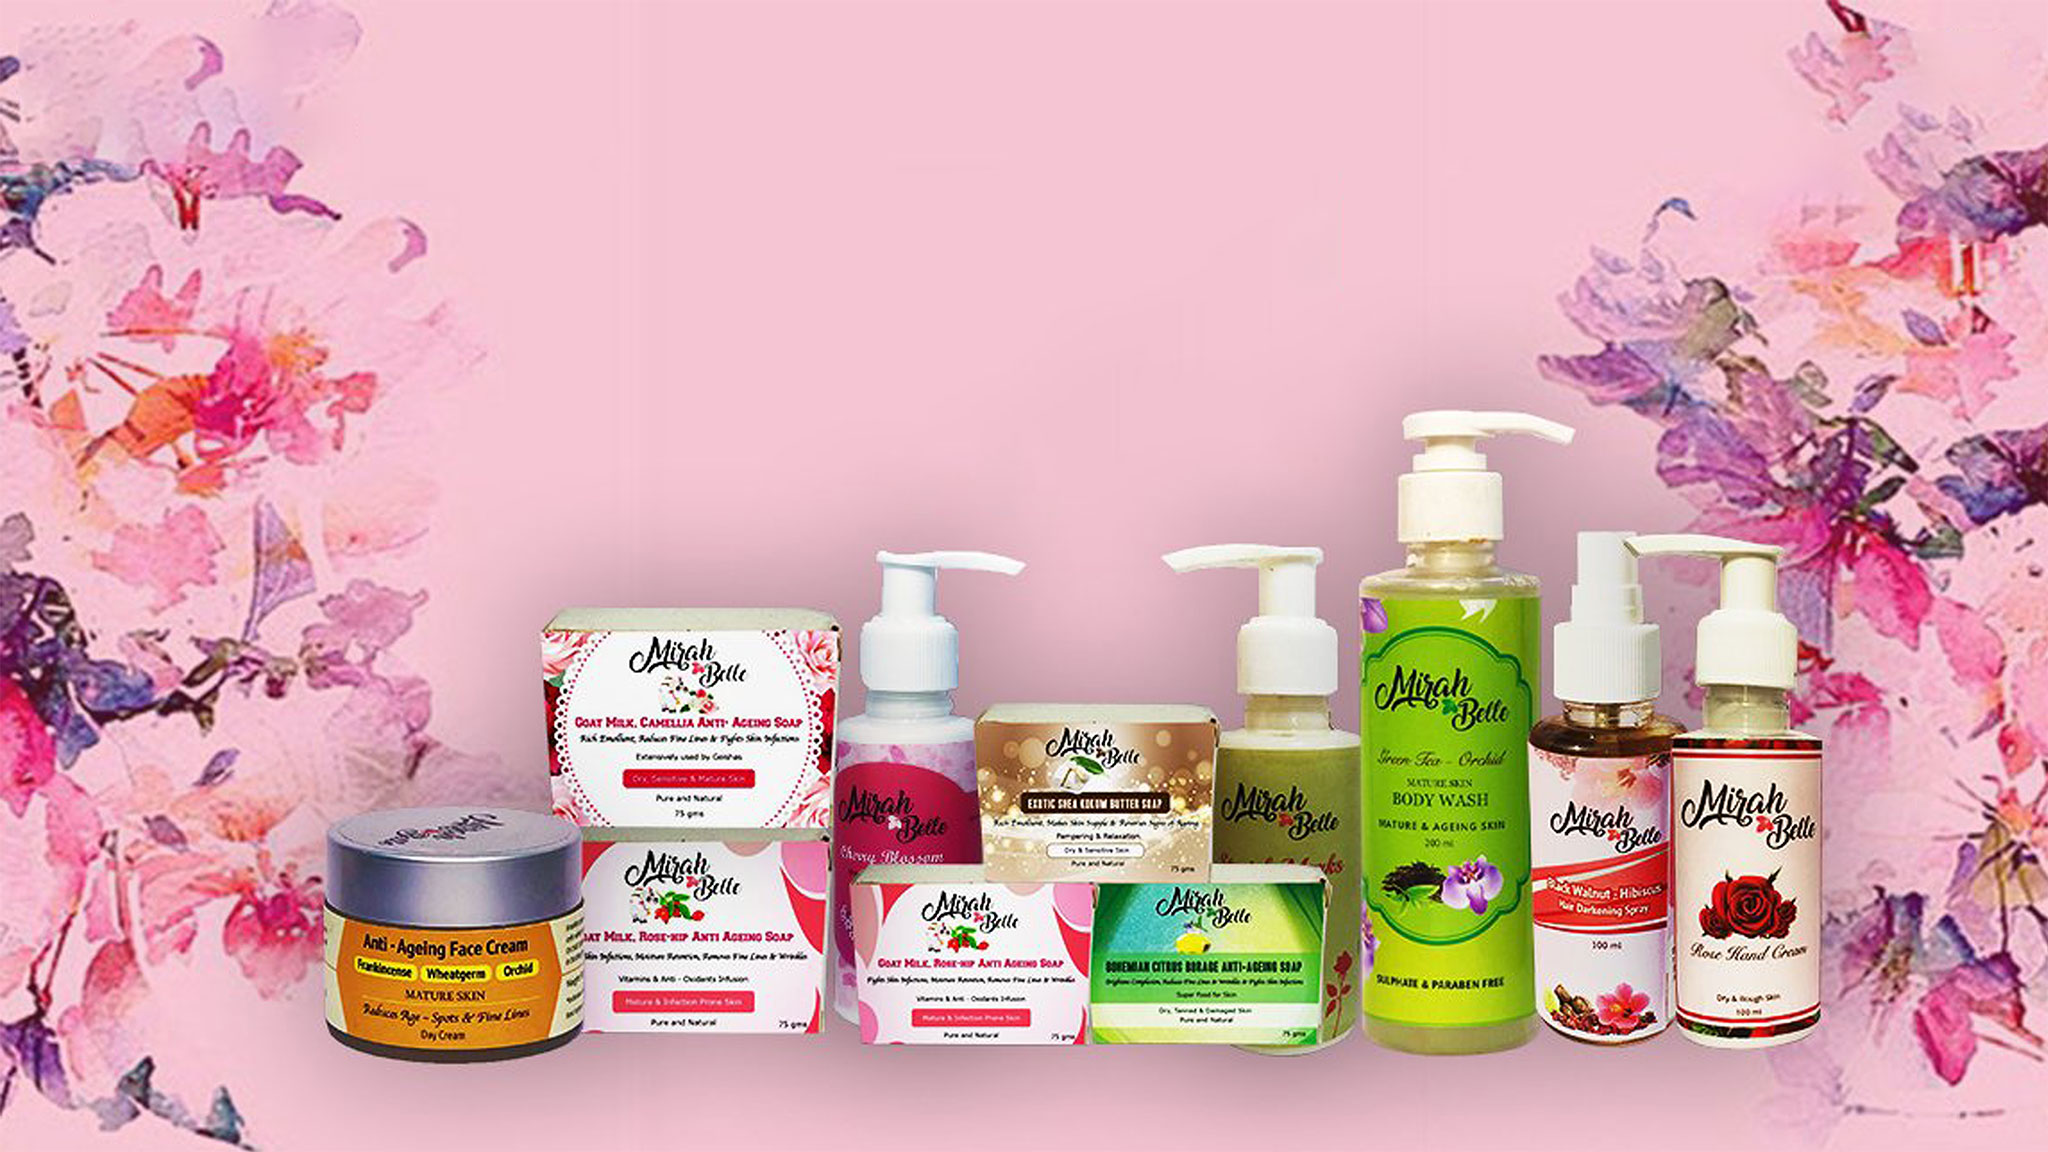 mirahbella_beauty products banner